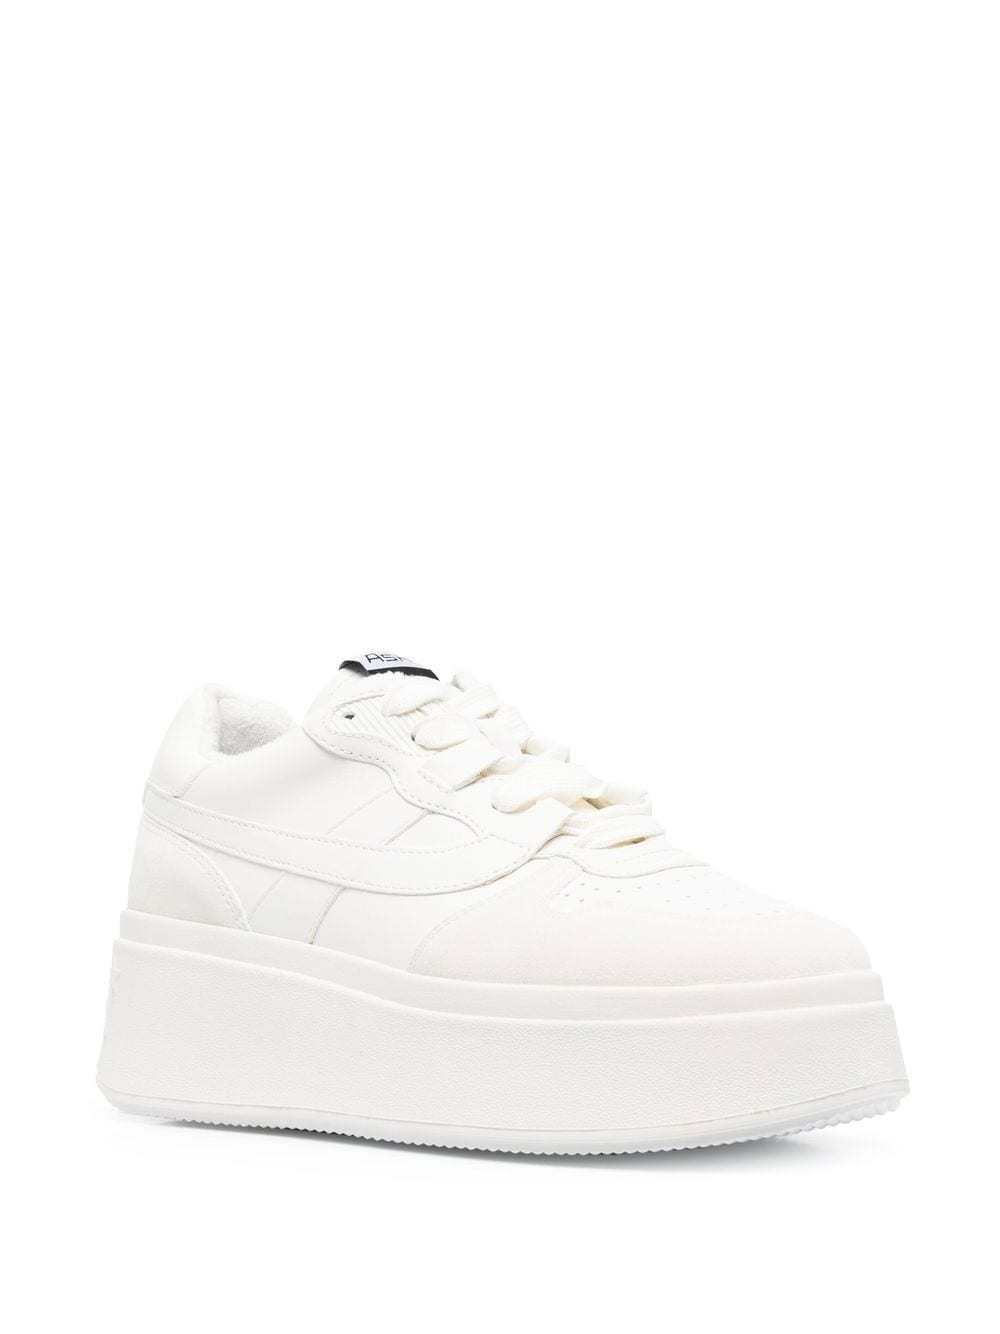 Ash Match sneakers met plateauzool - Wit